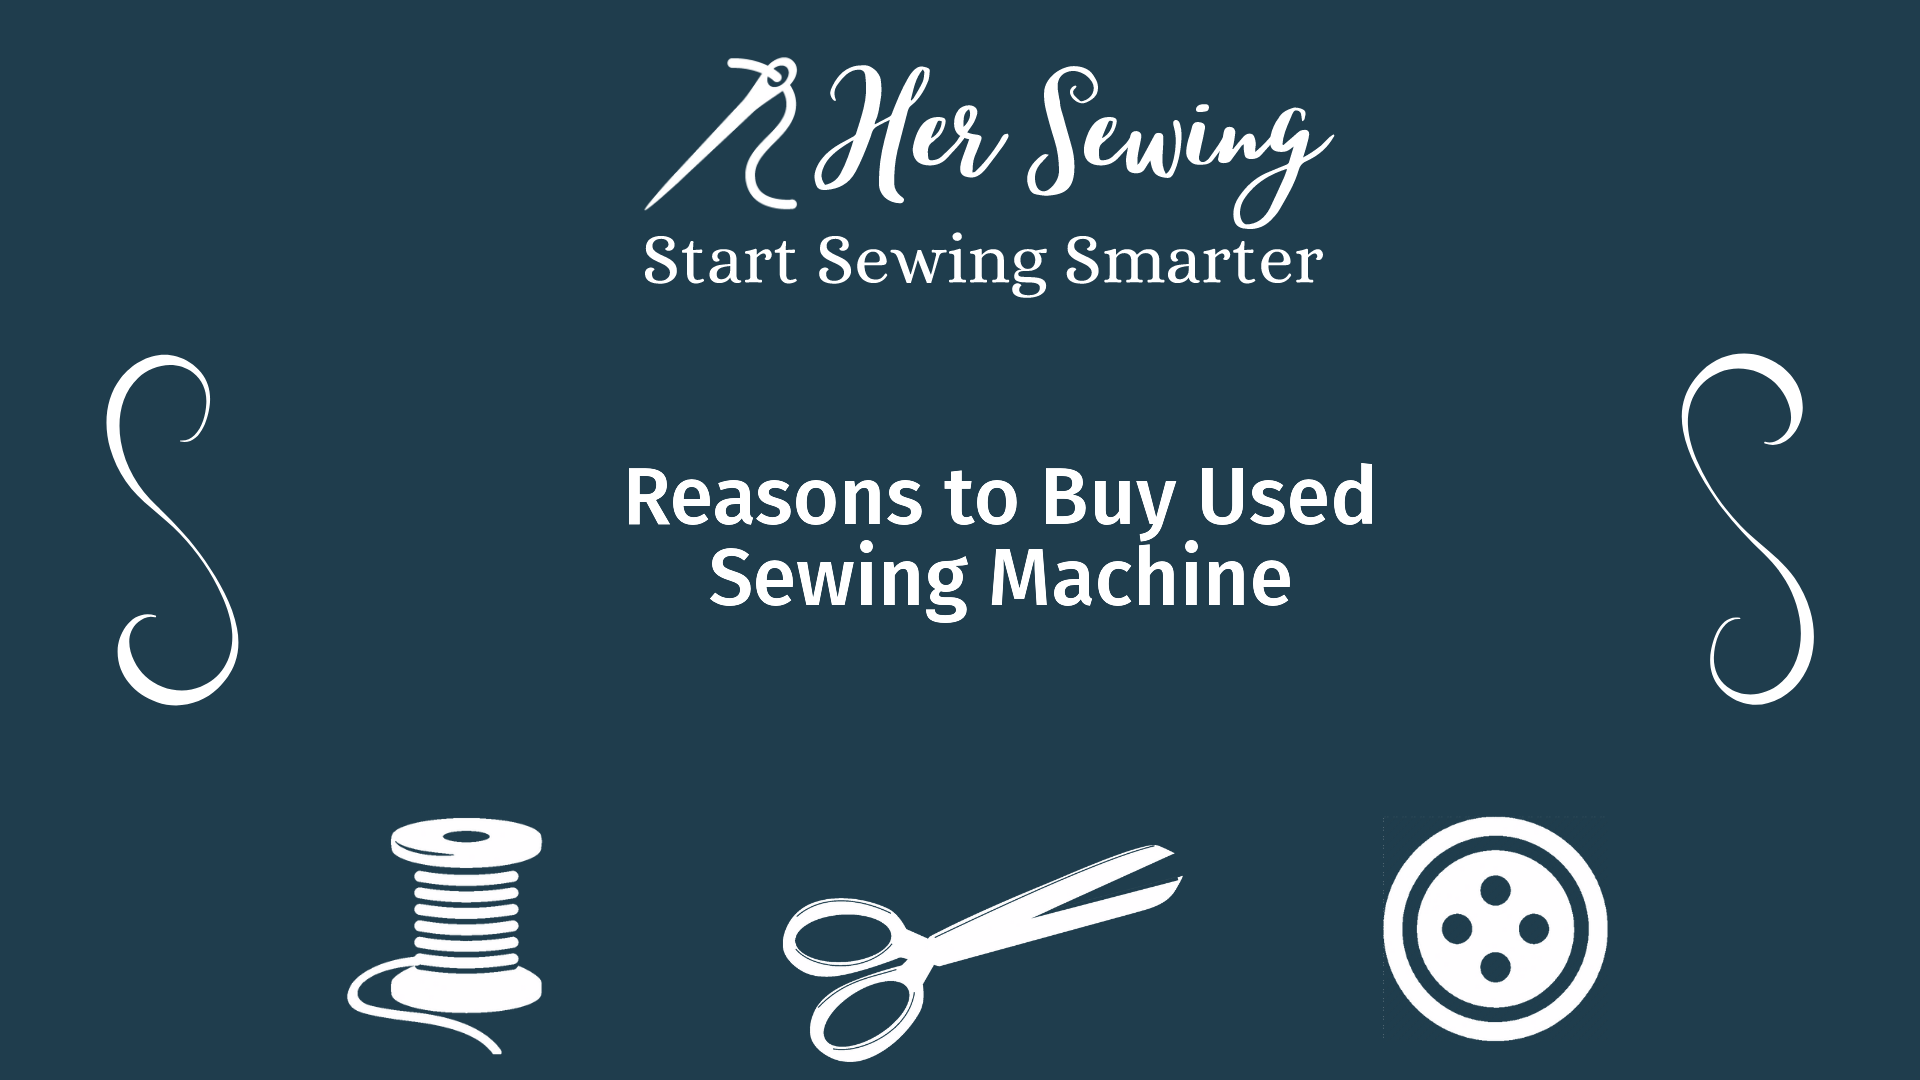 Reasons to Buy Used Sewing Machine